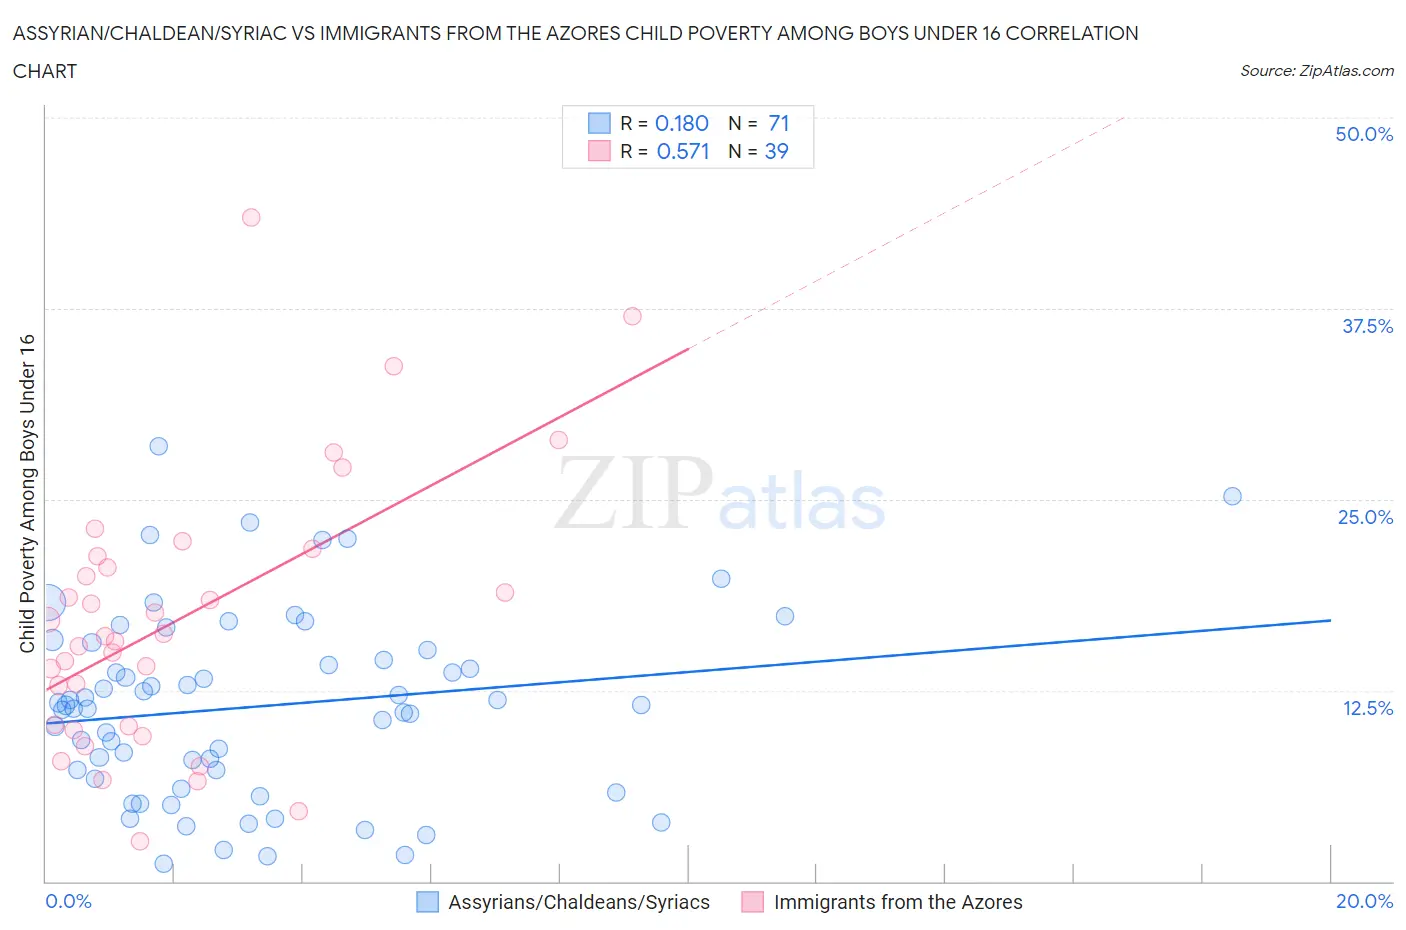 Assyrian/Chaldean/Syriac vs Immigrants from the Azores Child Poverty Among Boys Under 16